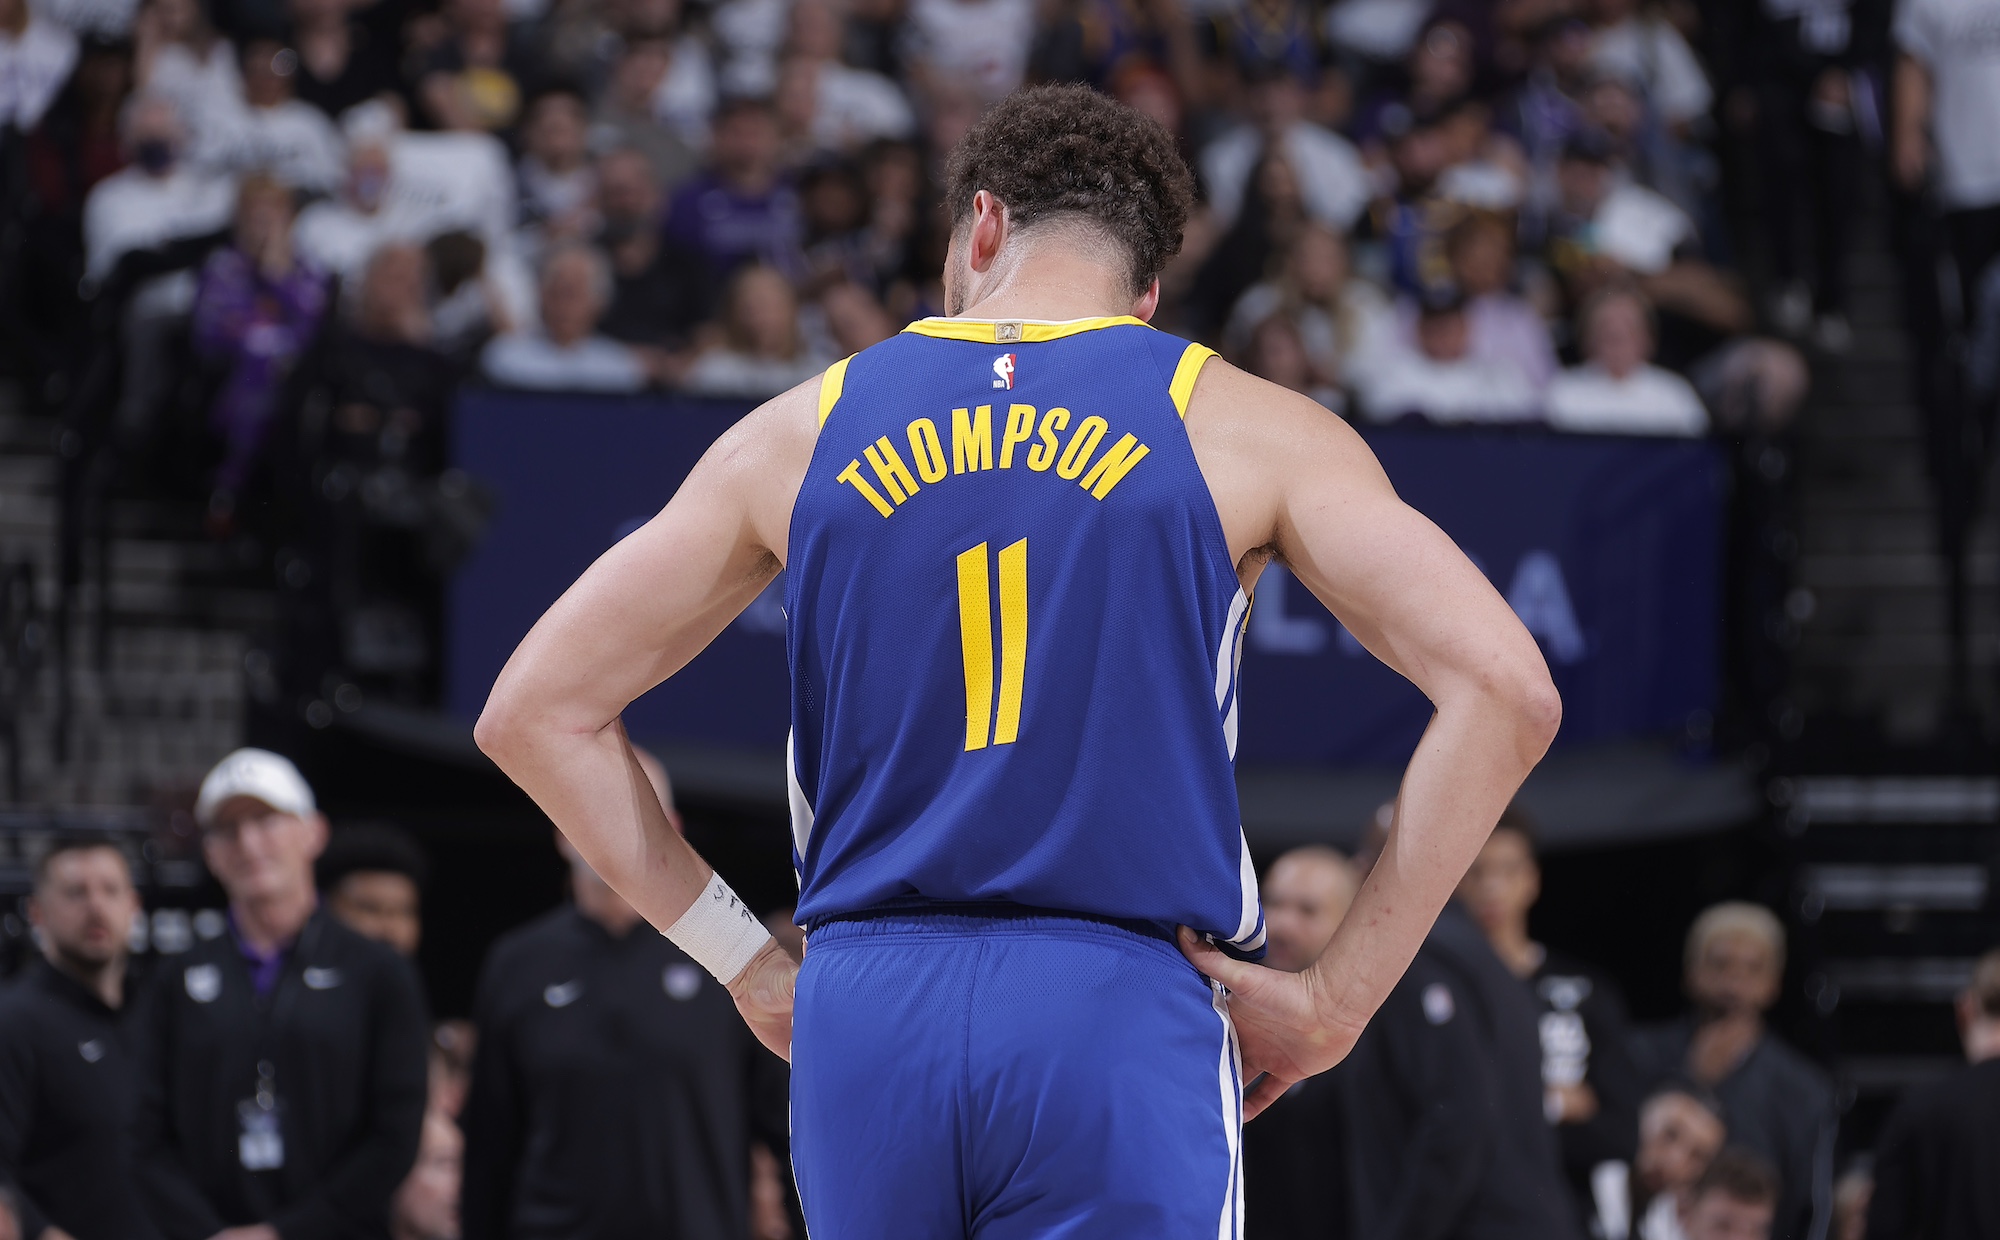 SACRAMENTO, CA - APRIL 16: Klay Thompson #11 of the Golden State Warriors looks on during the game against the Sacramento Kings during the 2024 Play-In Tournament on April 16, 2024 at Golden 1 Center in Sacramento, California. NOTE TO USER: User expressly acknowledges and agrees that, by downloading and or using this photograph, User is consenting to the terms and conditions of the Getty Images Agreement. Mandatory Copyright Notice: Copyright 2024 NBAE (Photo by Rocky Widner/NBAE via Getty Images)